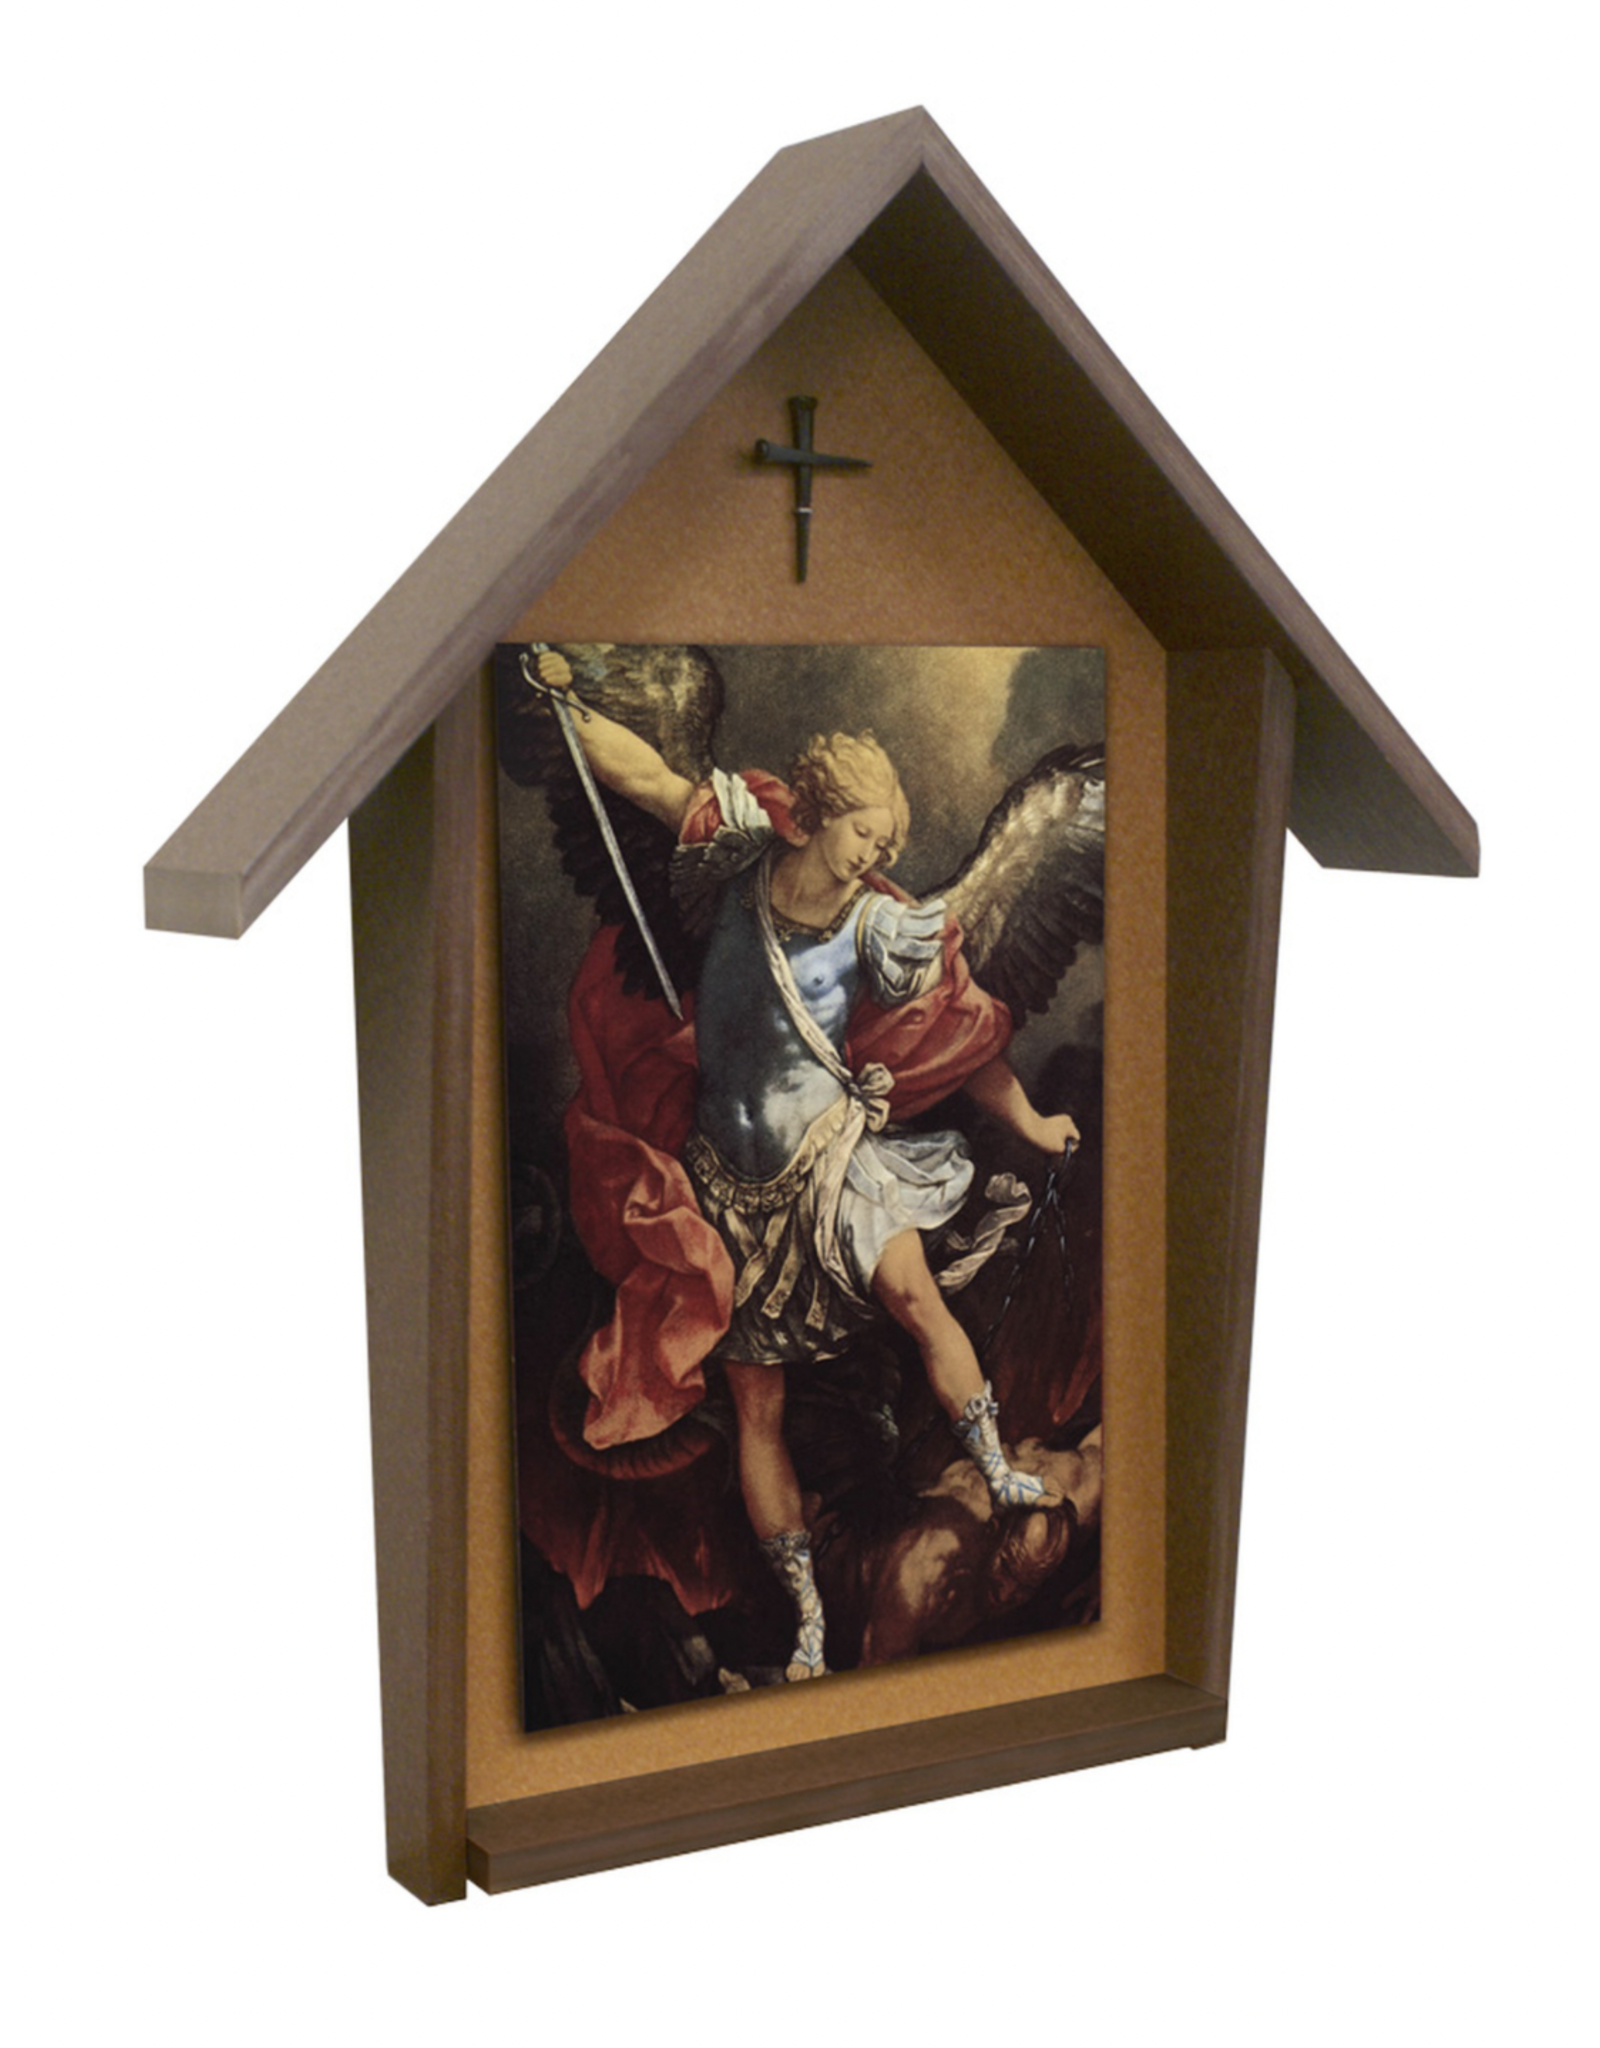 Nelson Art St. Michael Deluxe Poly Wood Outdoor Shrine (4x6 Picture)